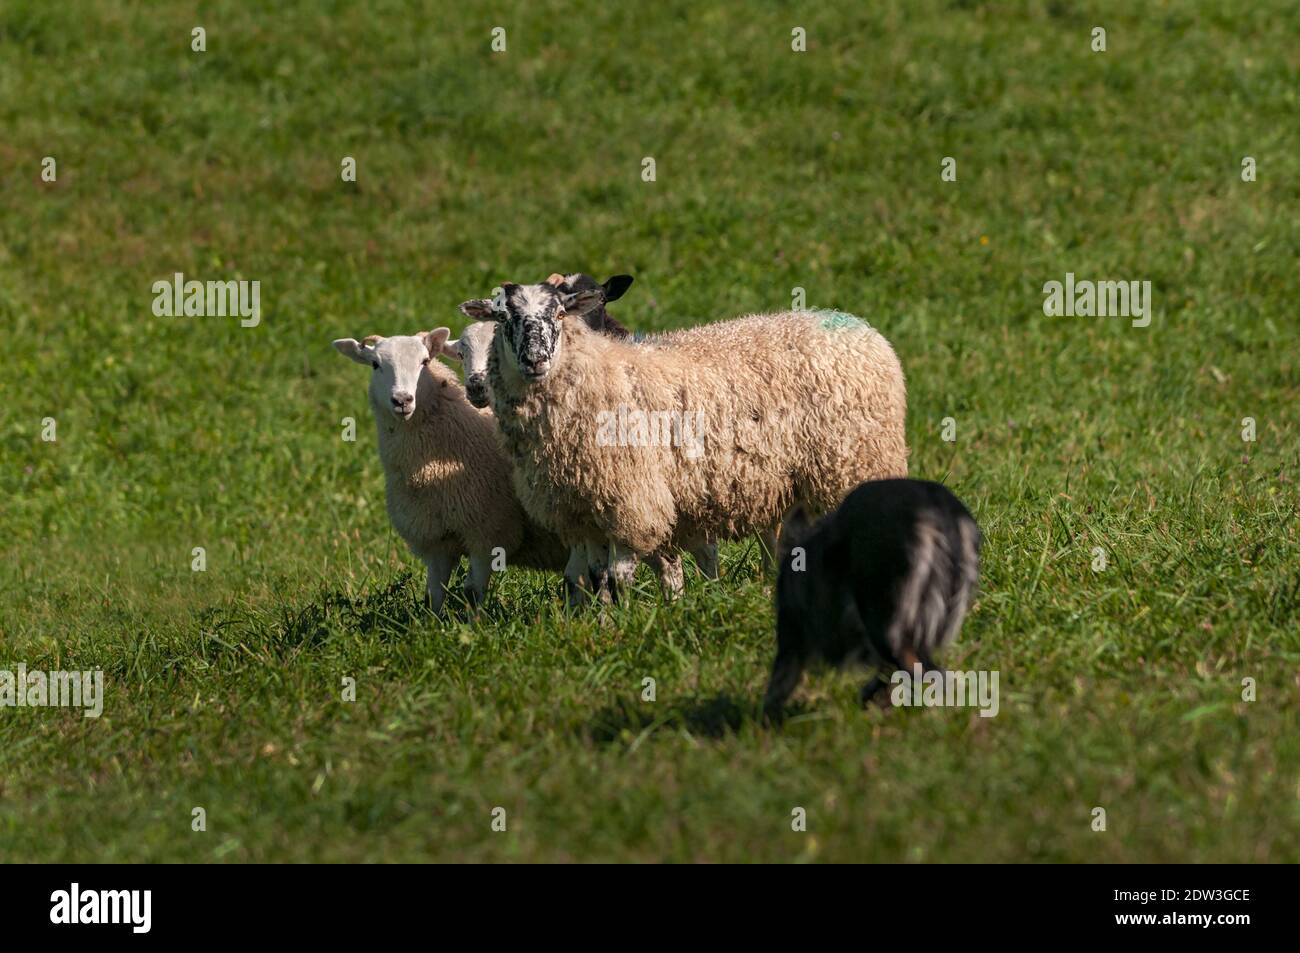 Group of Sheep (Ovis aries) Face Off with Herding Dog - at sheep dog herding trials Stock Photo